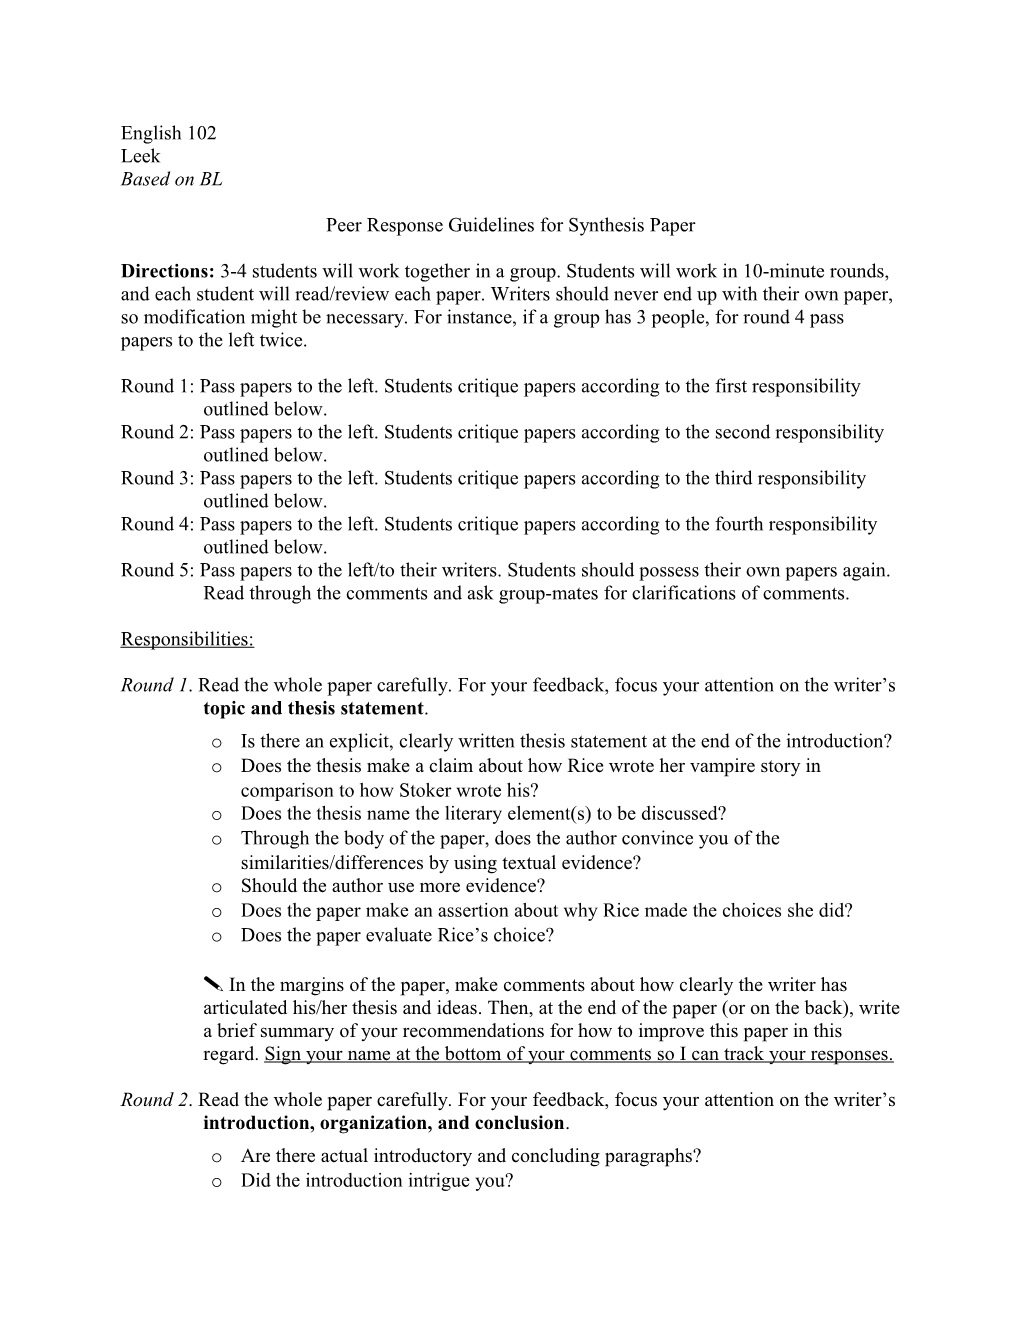 Peer Response Guidelines for Synthesis Paper